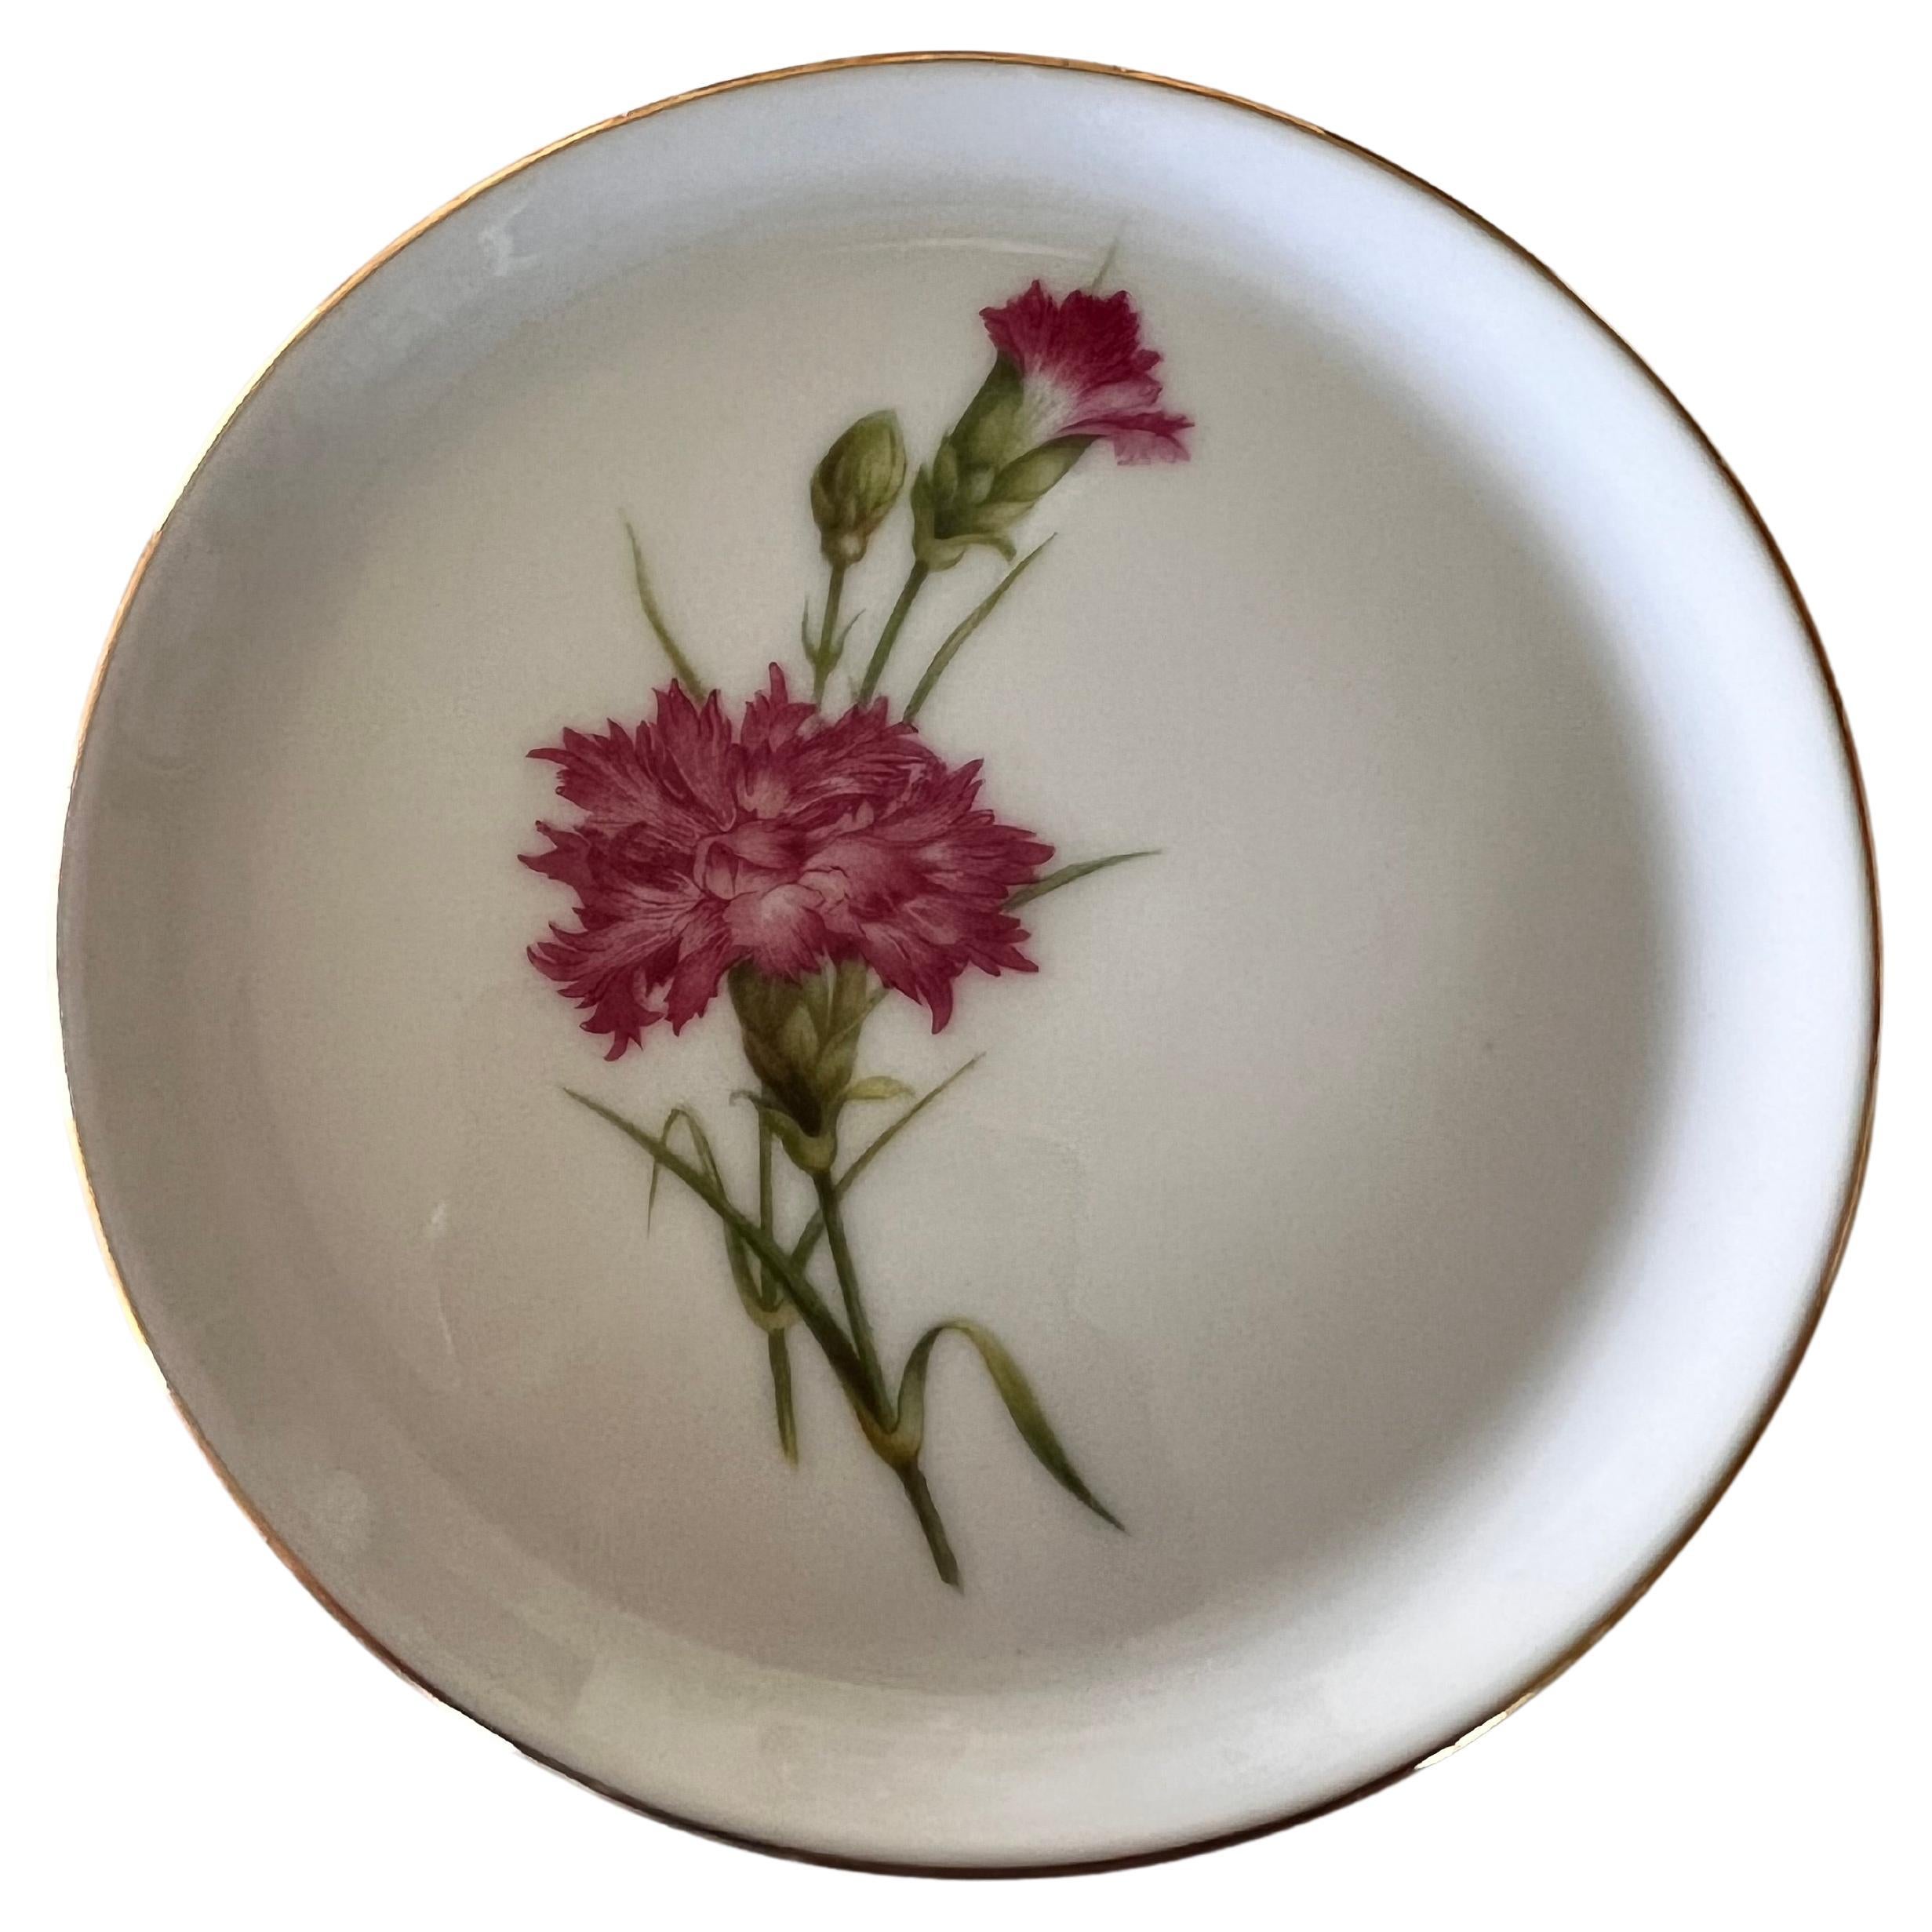 Furstenberg Germany vintage flower round gold leaf trinket plate 
Perfect gift for your special someone.
Dimensions:
Diameter 10 cm (3.93 inches)
A series of four make the matching plate to this one 
On 11 January 1747, Duke Charles I, ordered